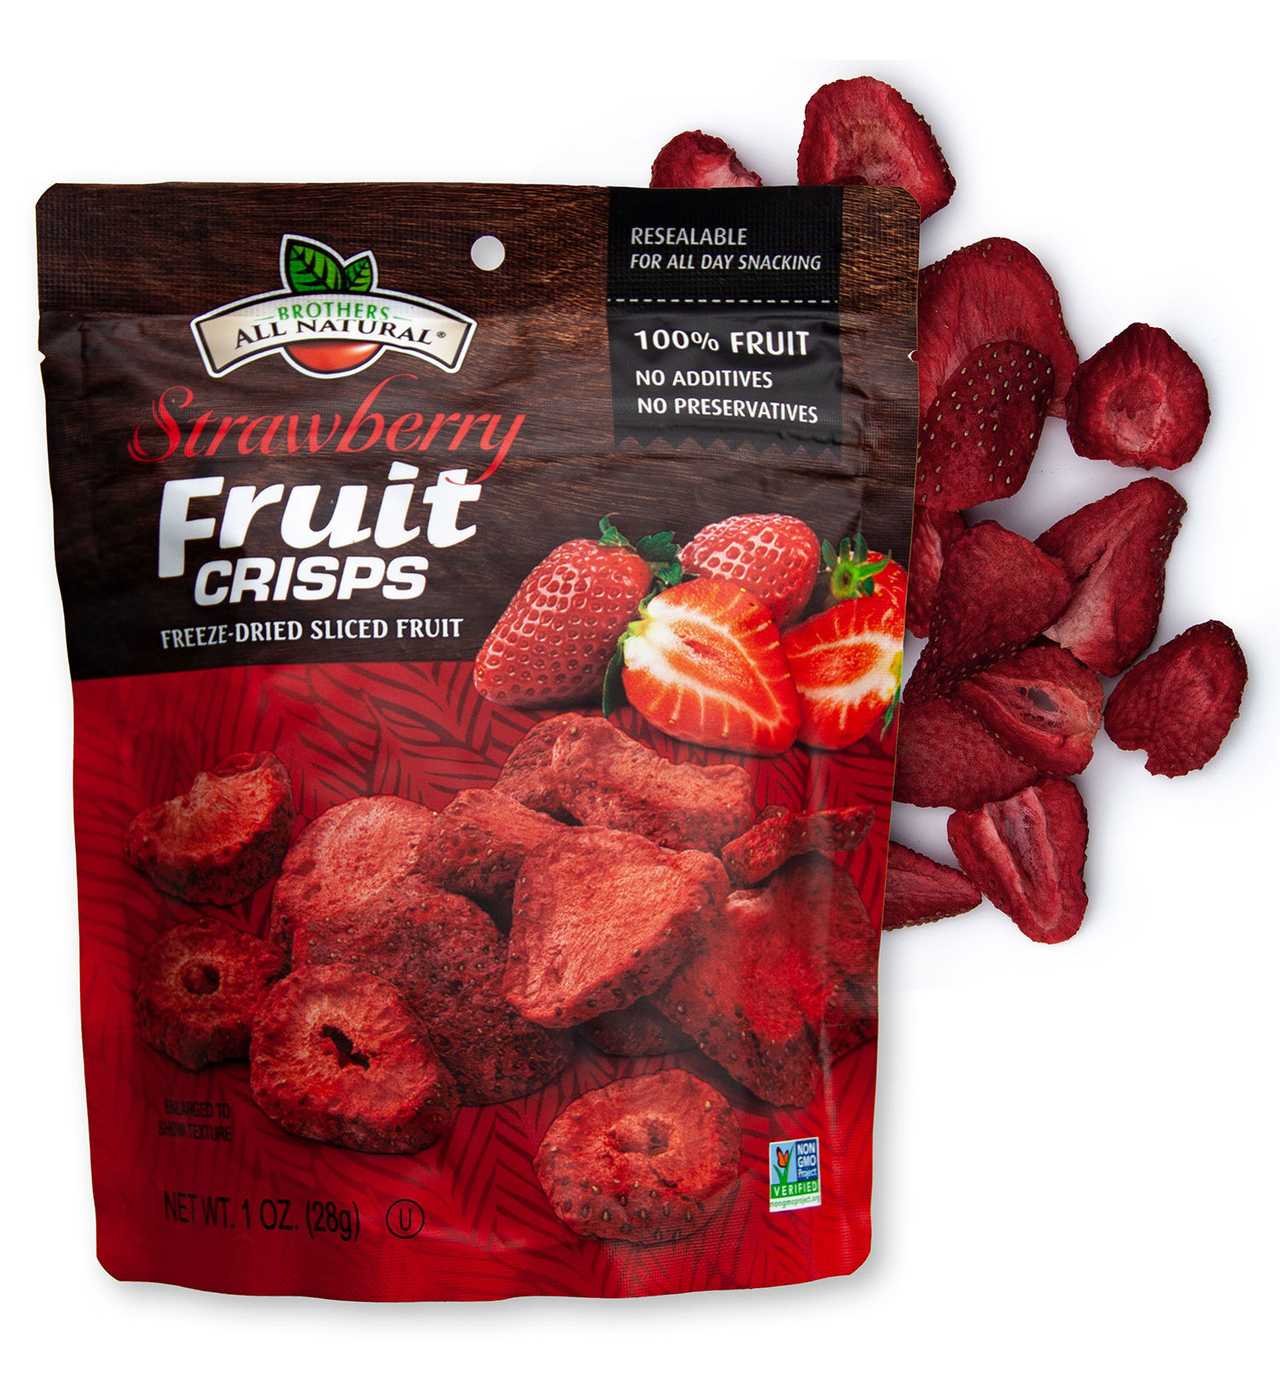 Brothers All Natural Strawberry Fruit Crisps; image 3 of 3